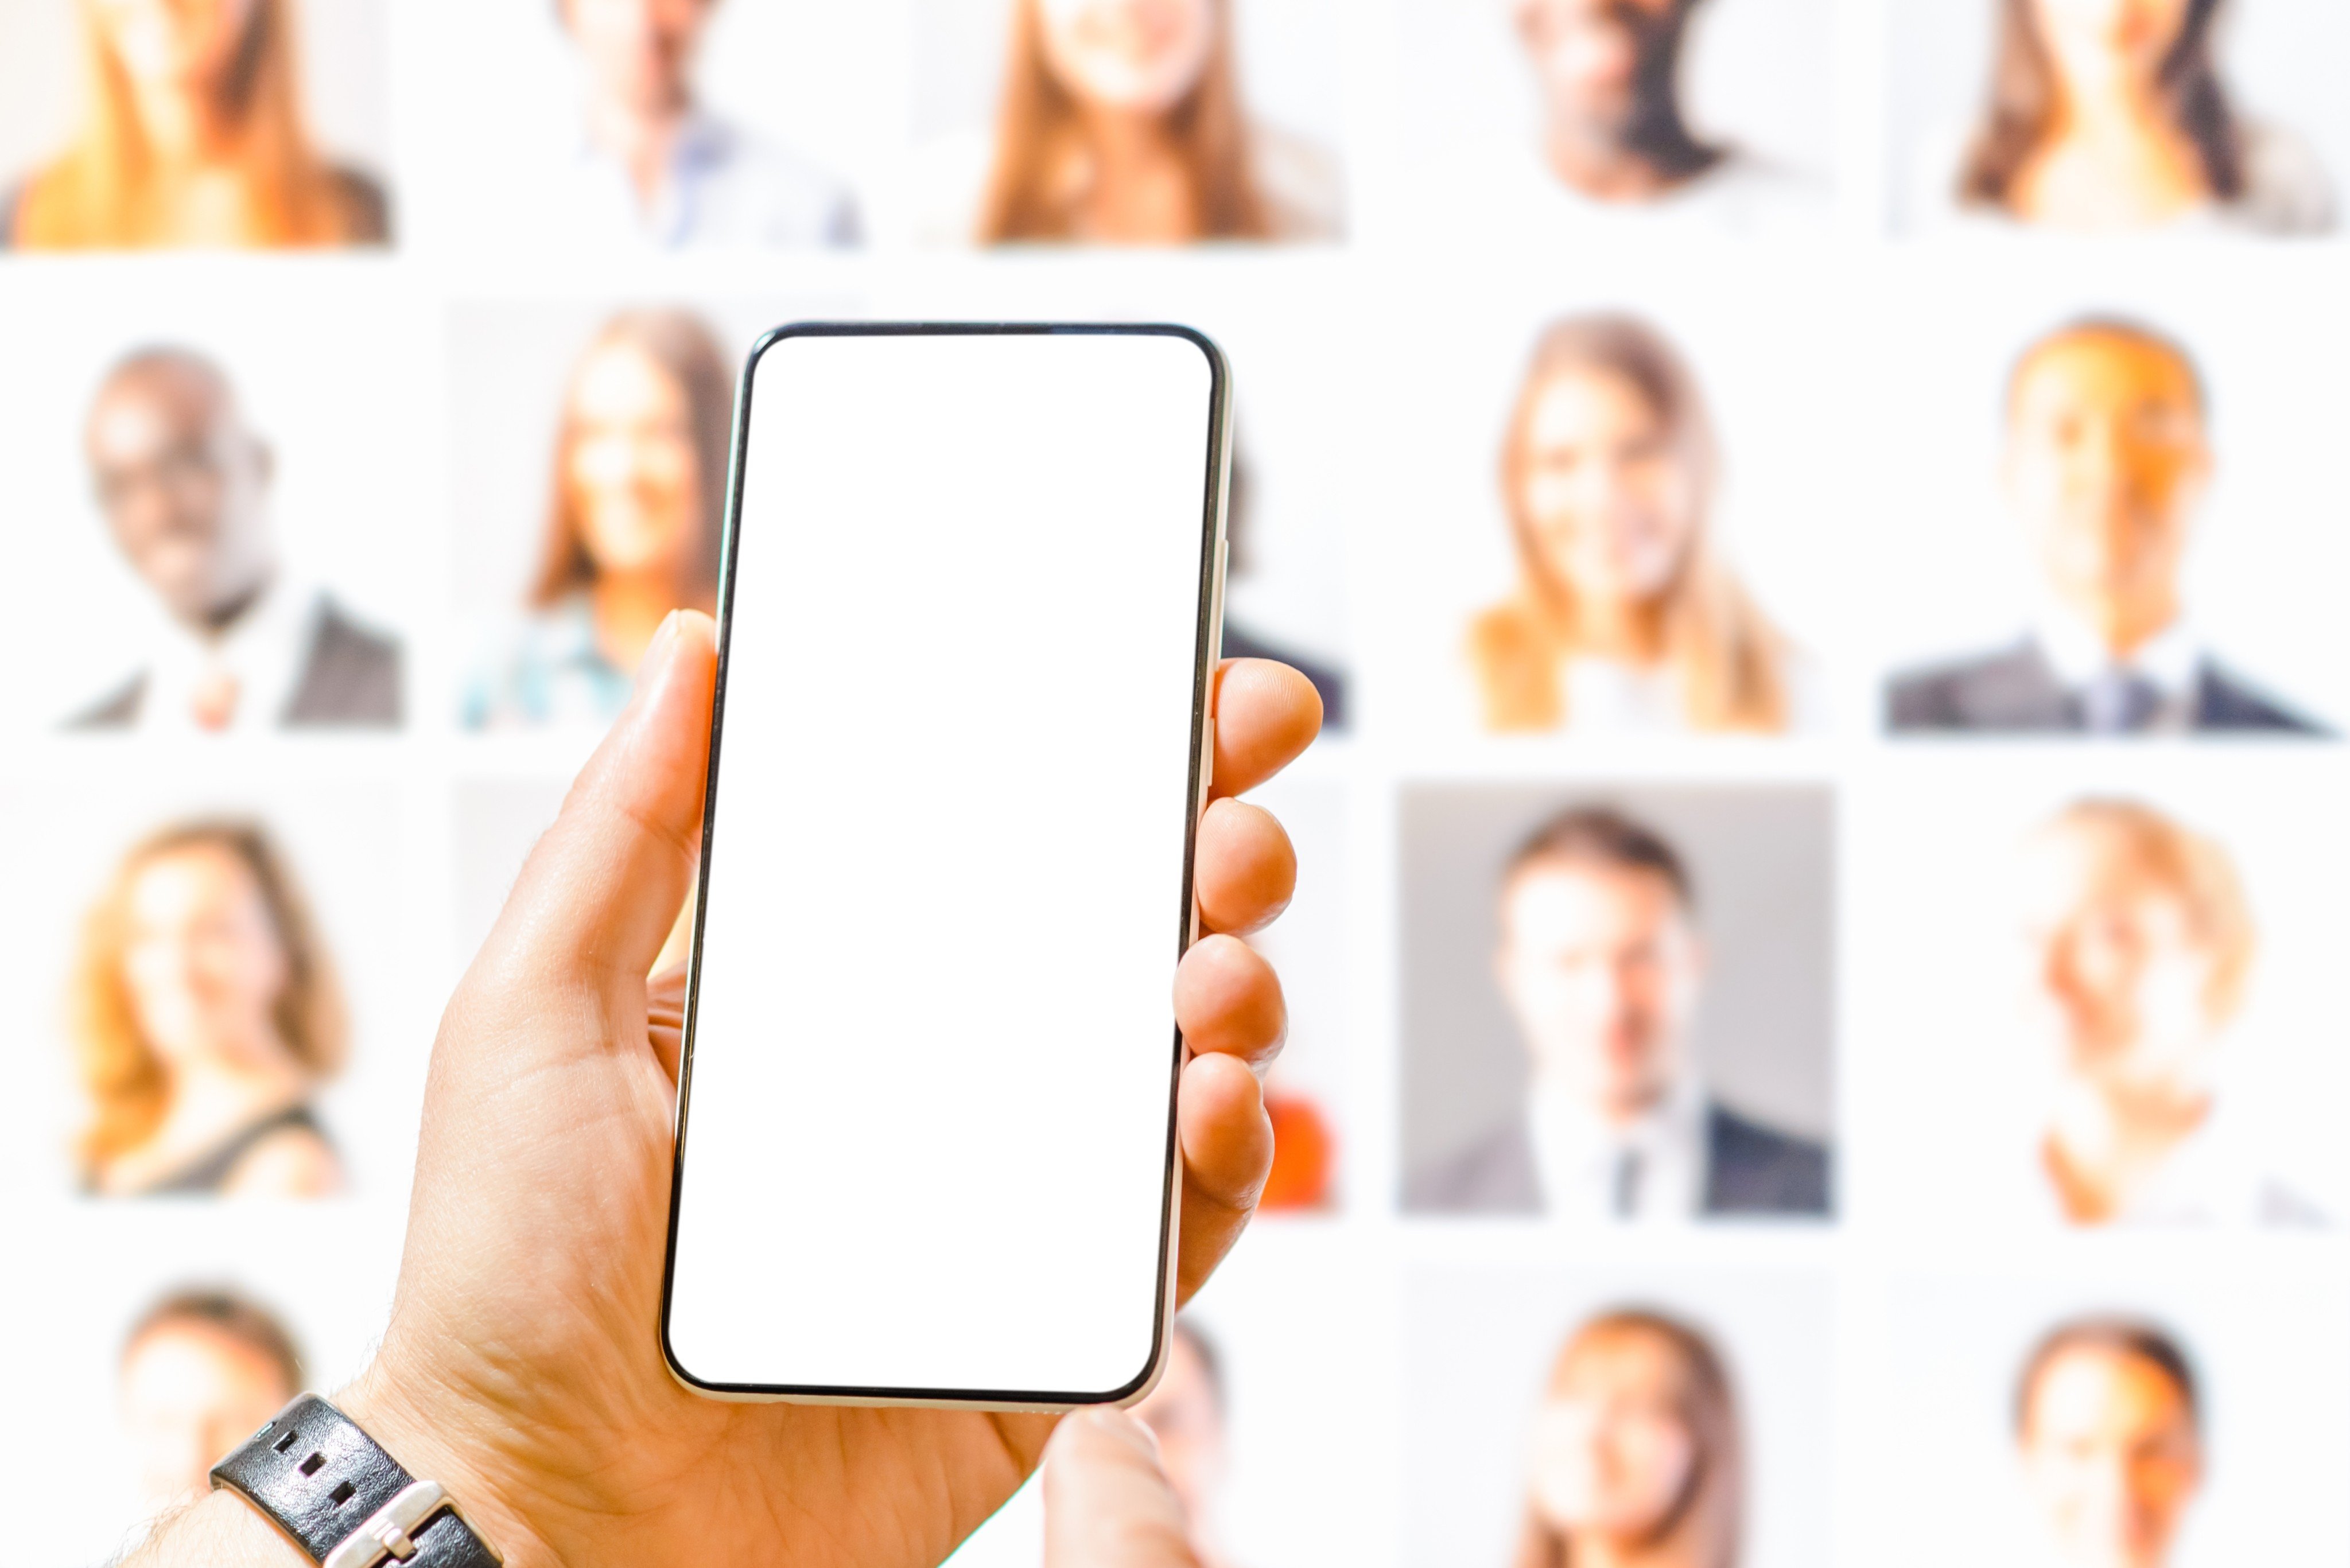 Artificial intelligence is offering people an easy way to quickly generate new images that they can use to spruce up their online image. Photo: Shutterstock